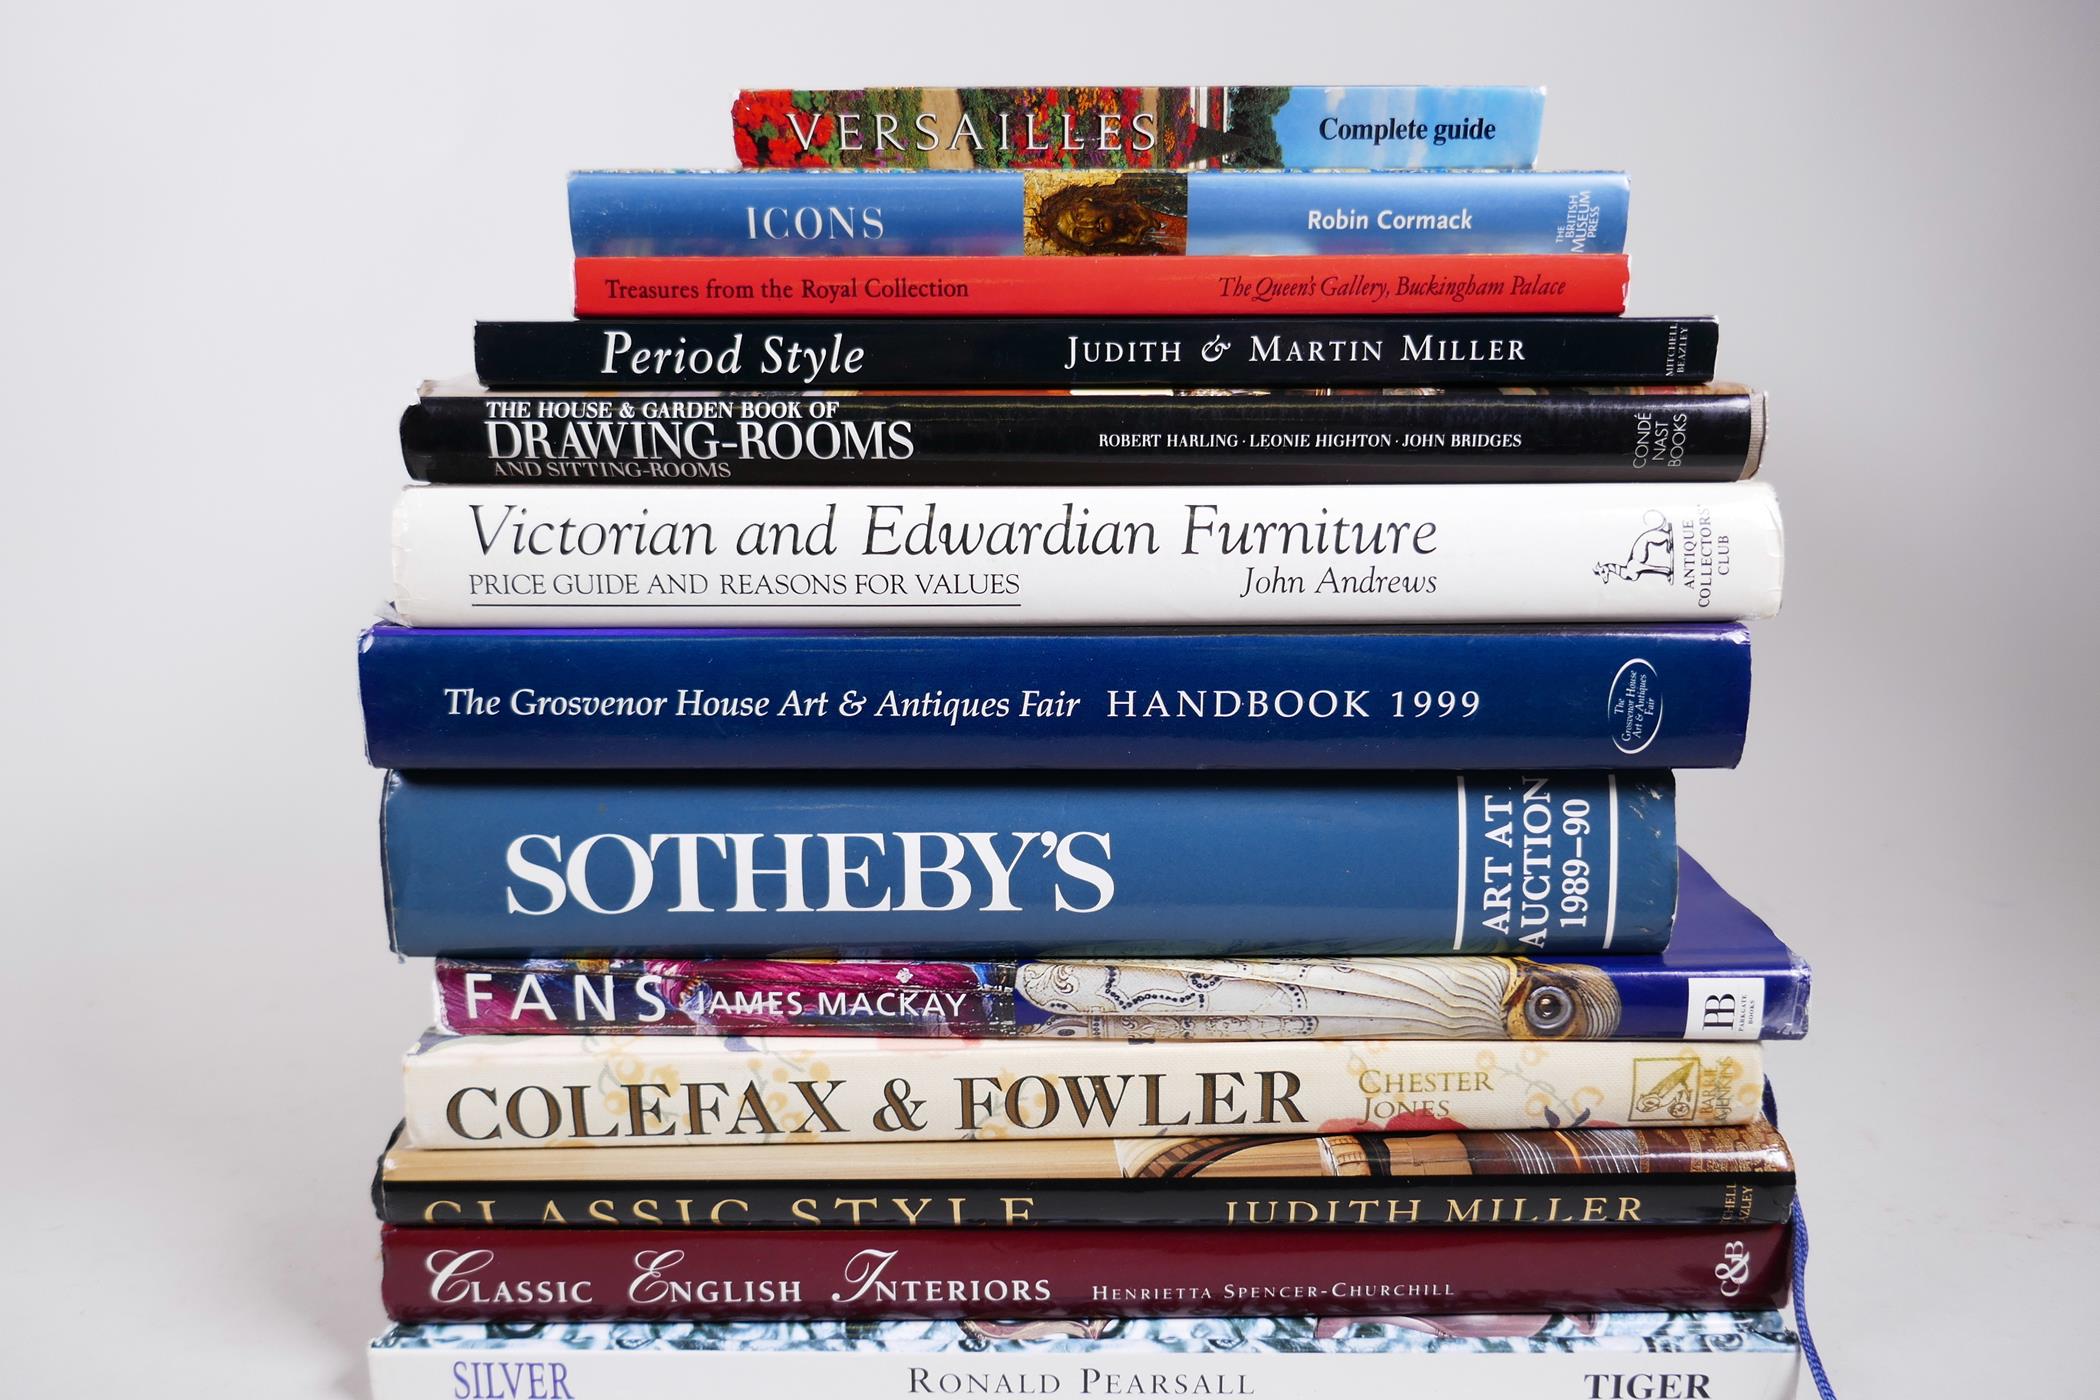 A selection of oversized coffee table books, covering classic English homes and interiors, including